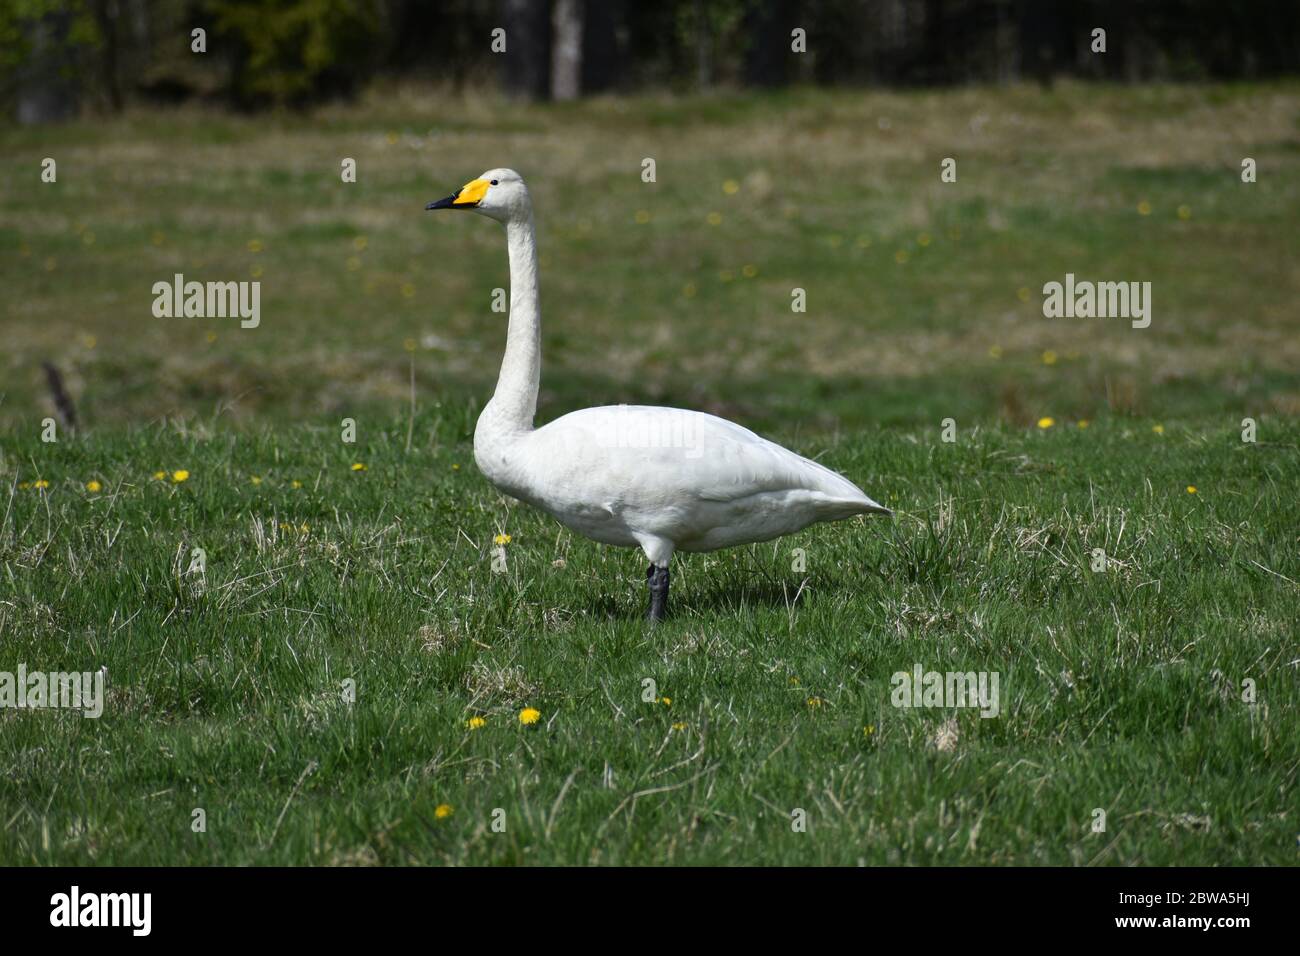 Whooper swan walking on a field as I was passing by. Wonderful experience early spring. Stock Photo